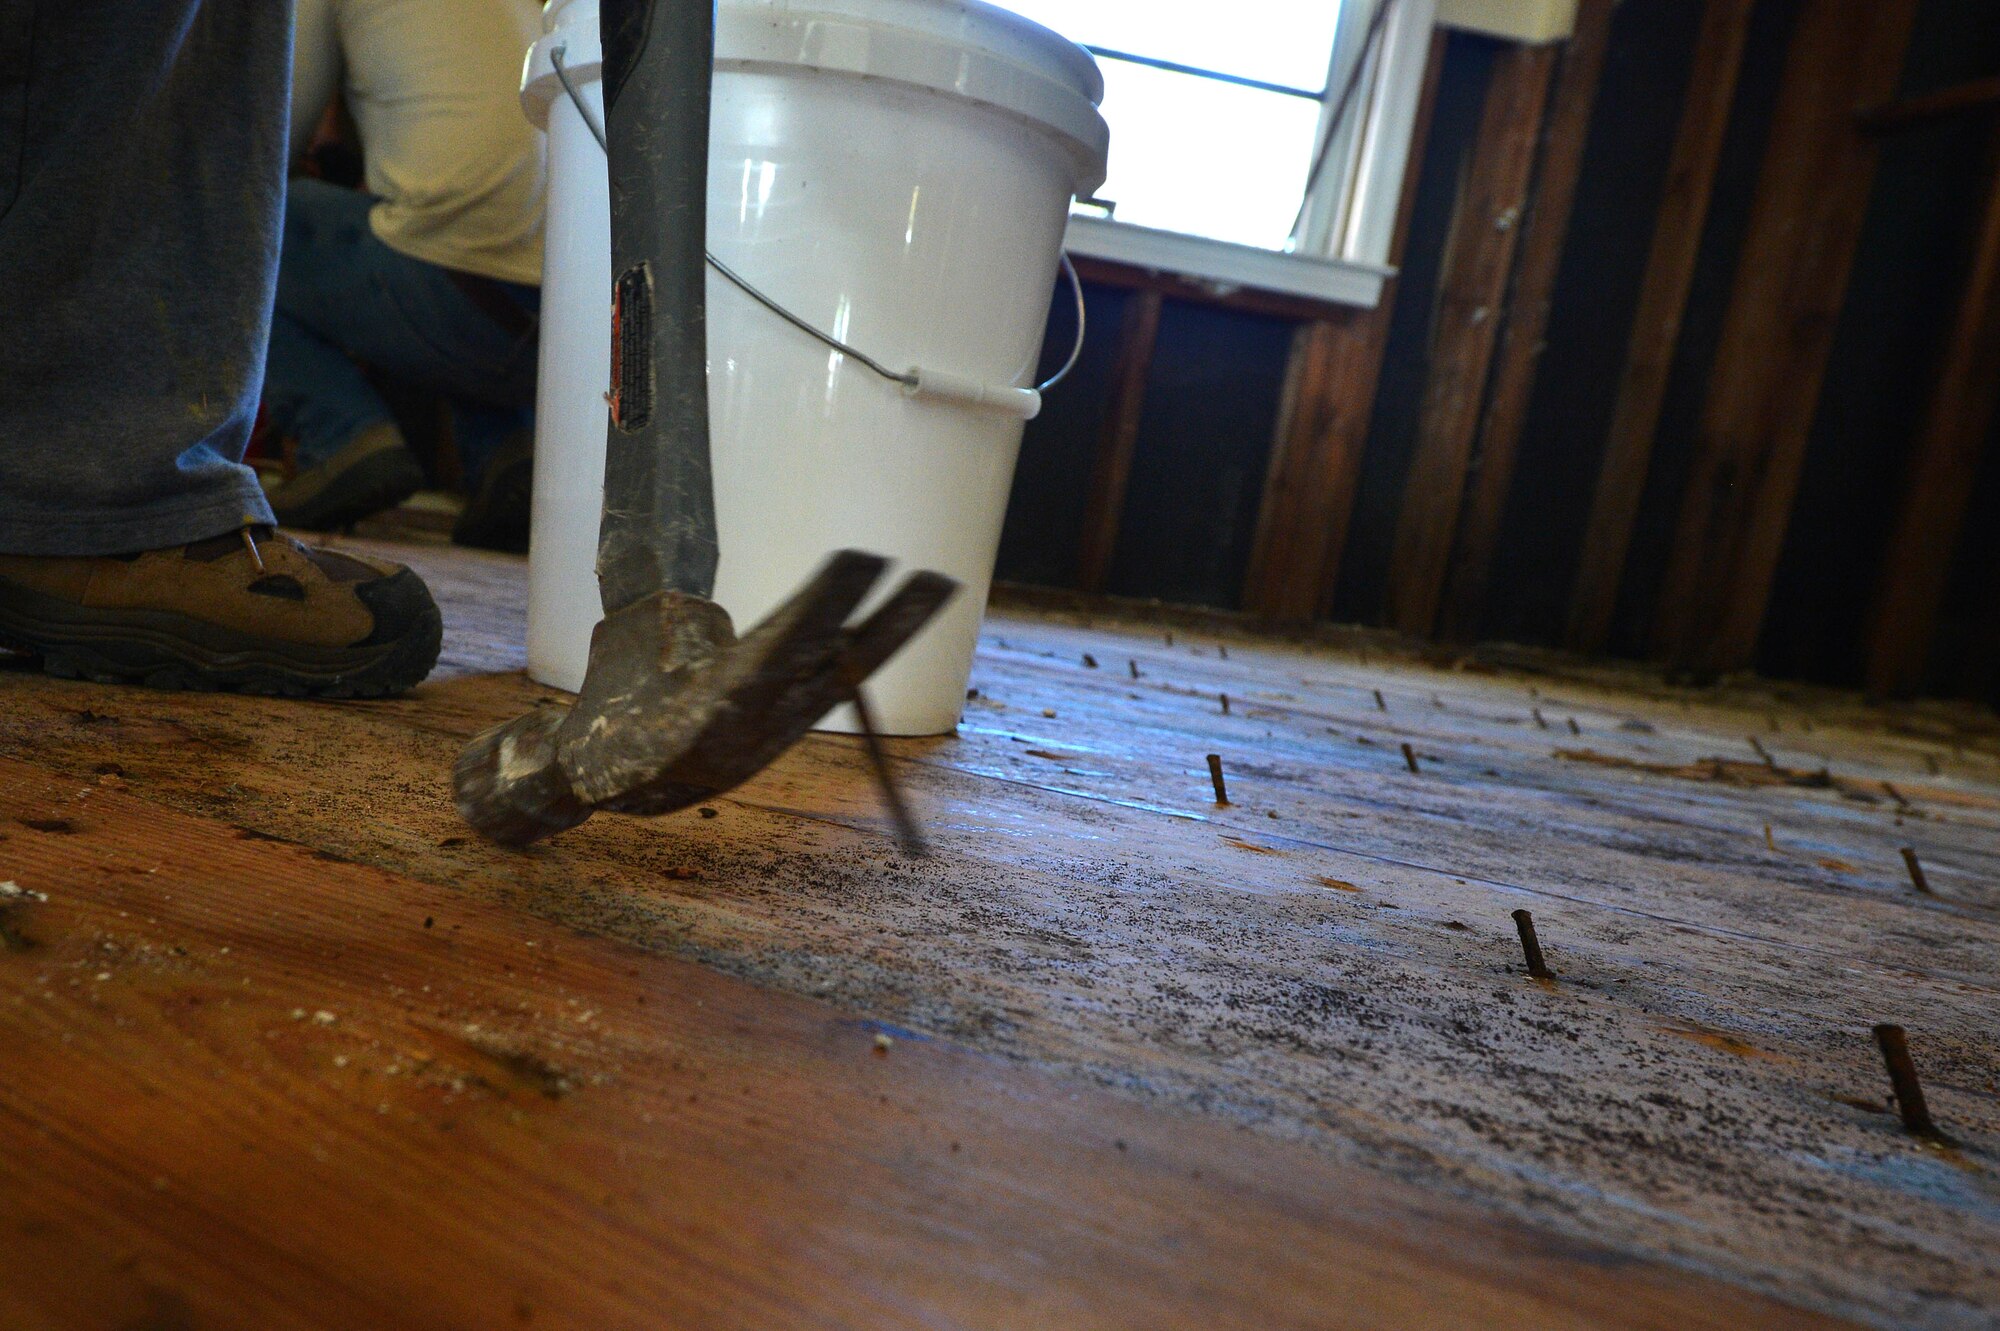 A disaster relief volunteer pulls a nail out of the subfloor of a house affected by the flood in Sumter, S.C., Oct. 19, 2015. The main focus for volunteers from Shaw Air Force Base, S.C., and the Southern Baptist Convention disaster relief team from Kentucky was to remove the mold from the house, including in the wood floors, and to kill any remaining mold preventing new mold from growing. (U.S. Air Force photo by Senior Airman Diana M. Cossaboom/Released)